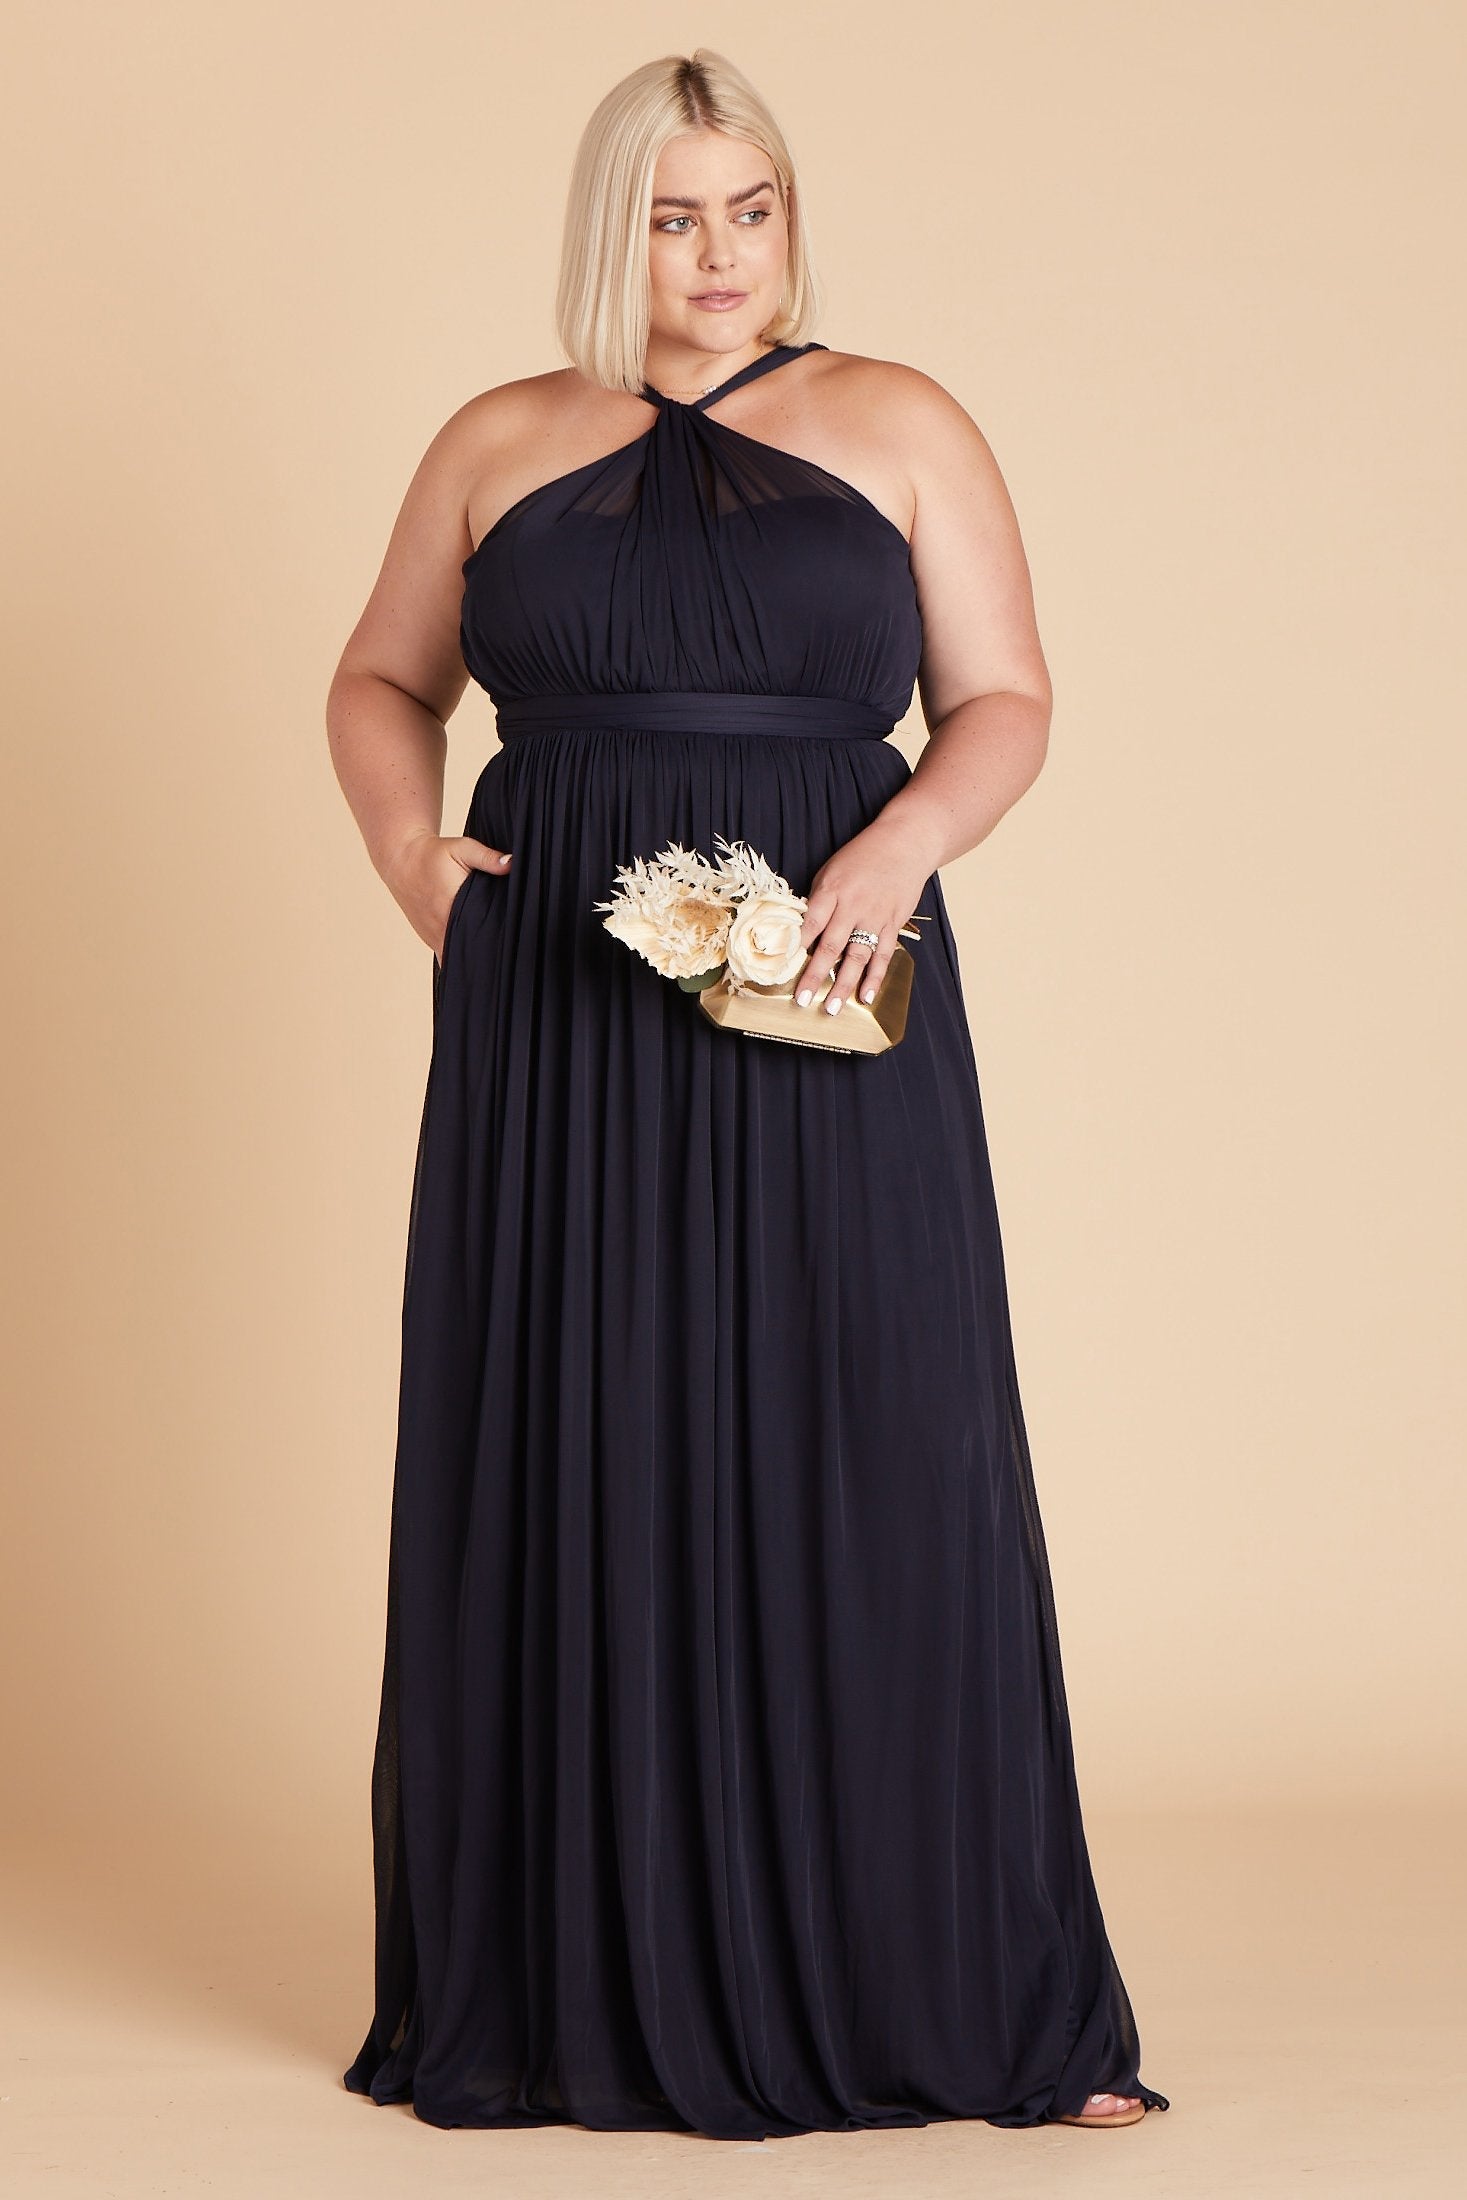 Kiko plus size bridesmaid dress in navy blue chiffon by Birdy Grey, front view with hand in pocket